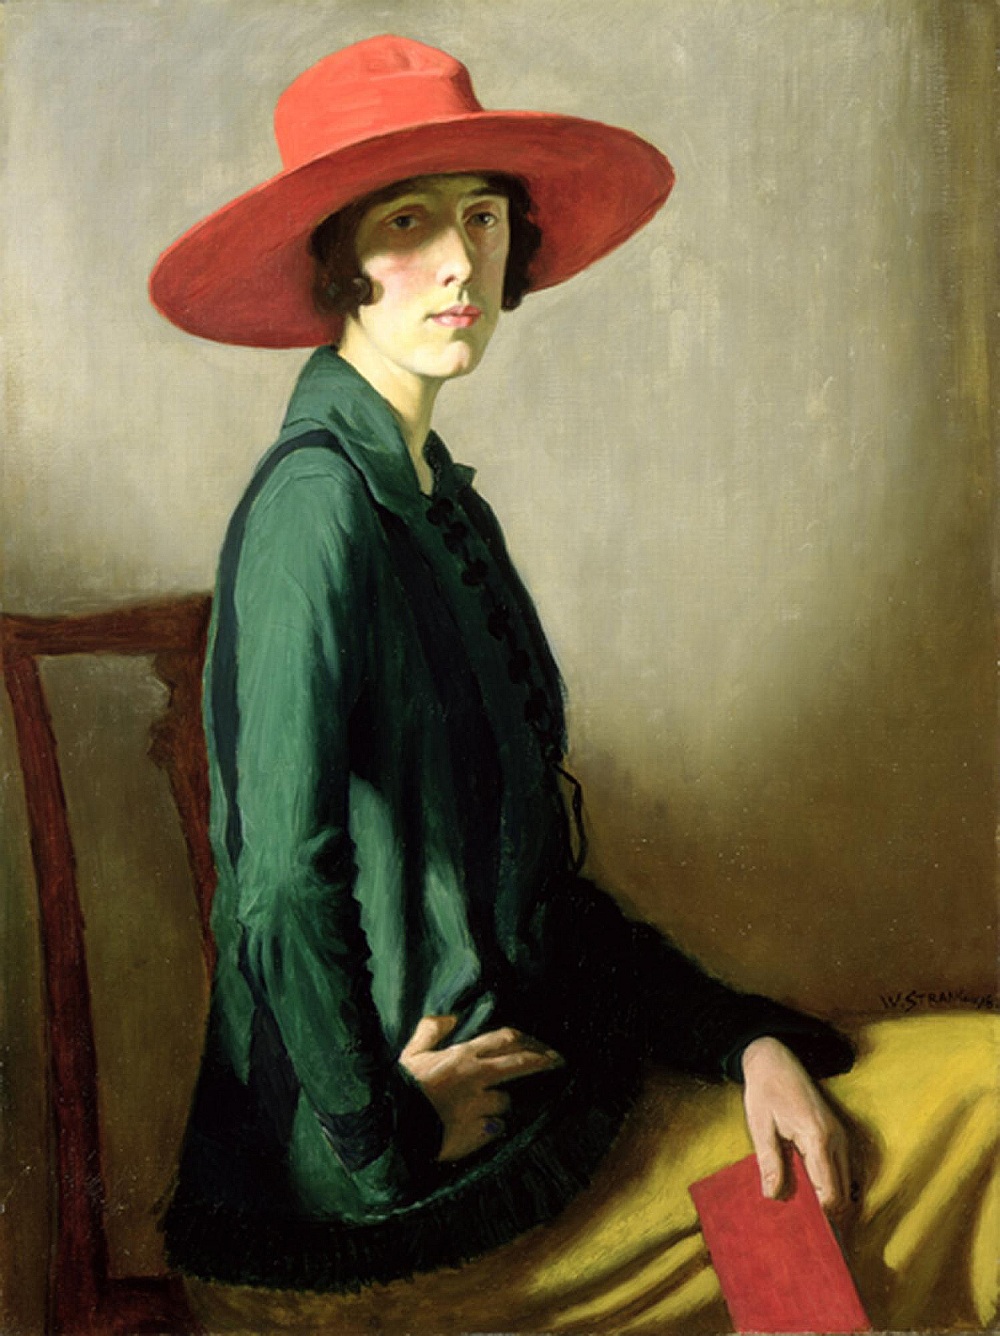 Lady with a Red Hat (Portrait of Vita Sackville-West) (1918) by William Strang